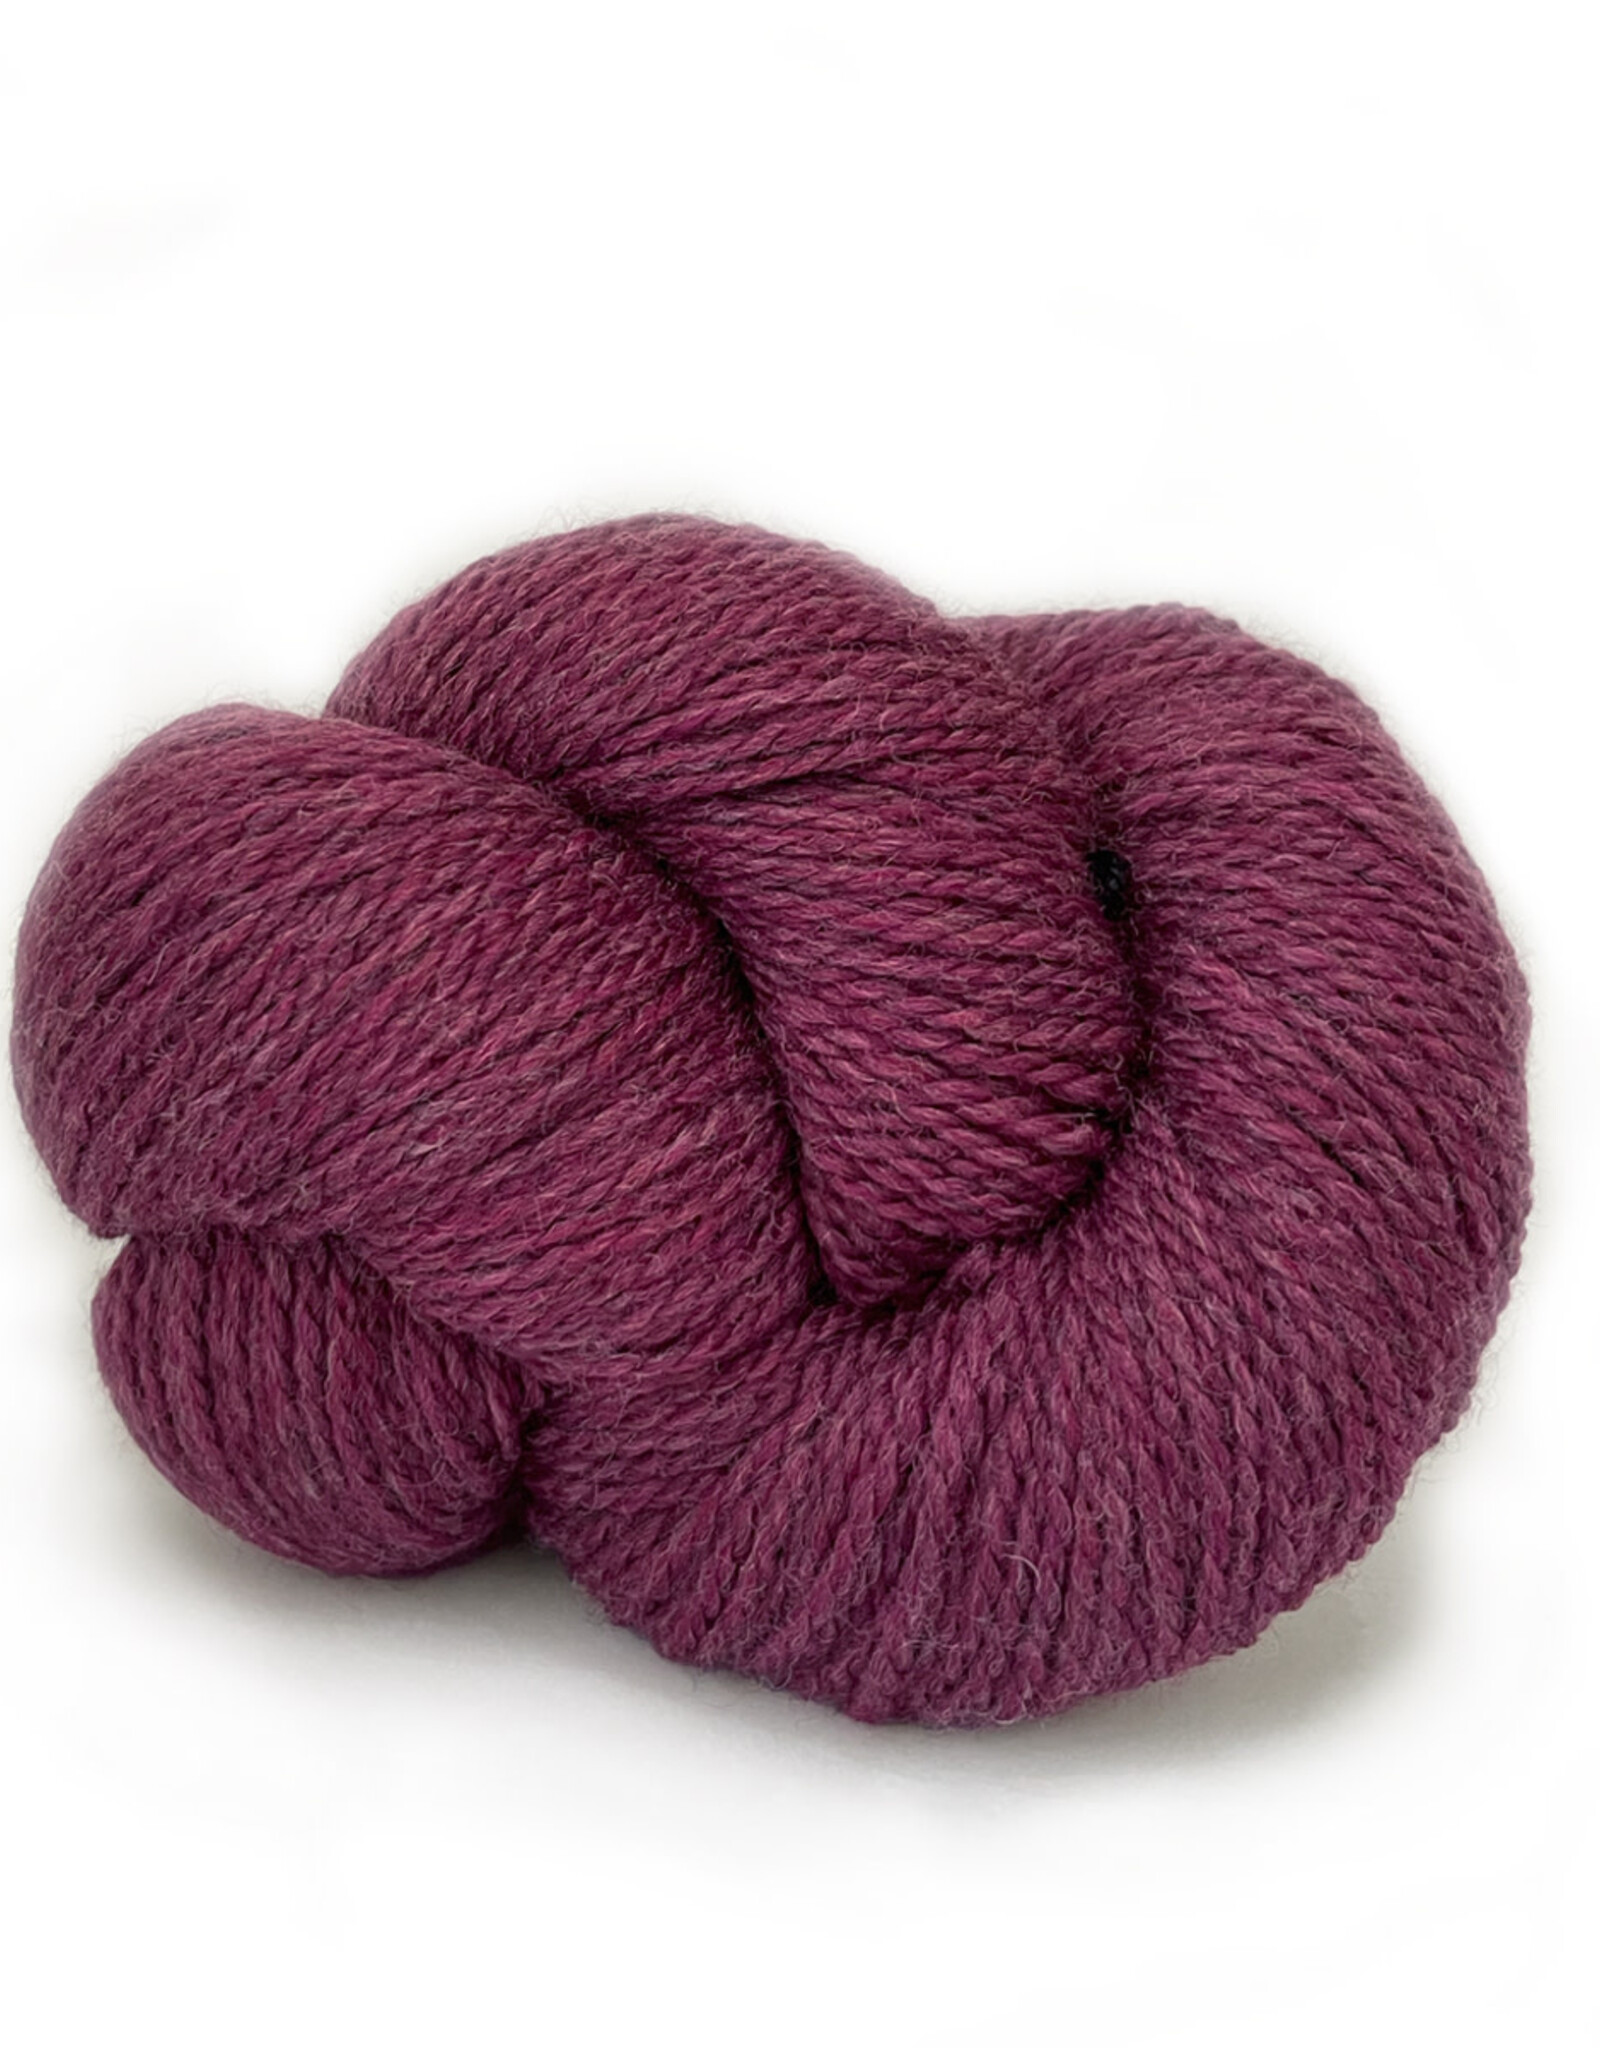 Kelbourne Woolens Scout 100g 610 rosewood h